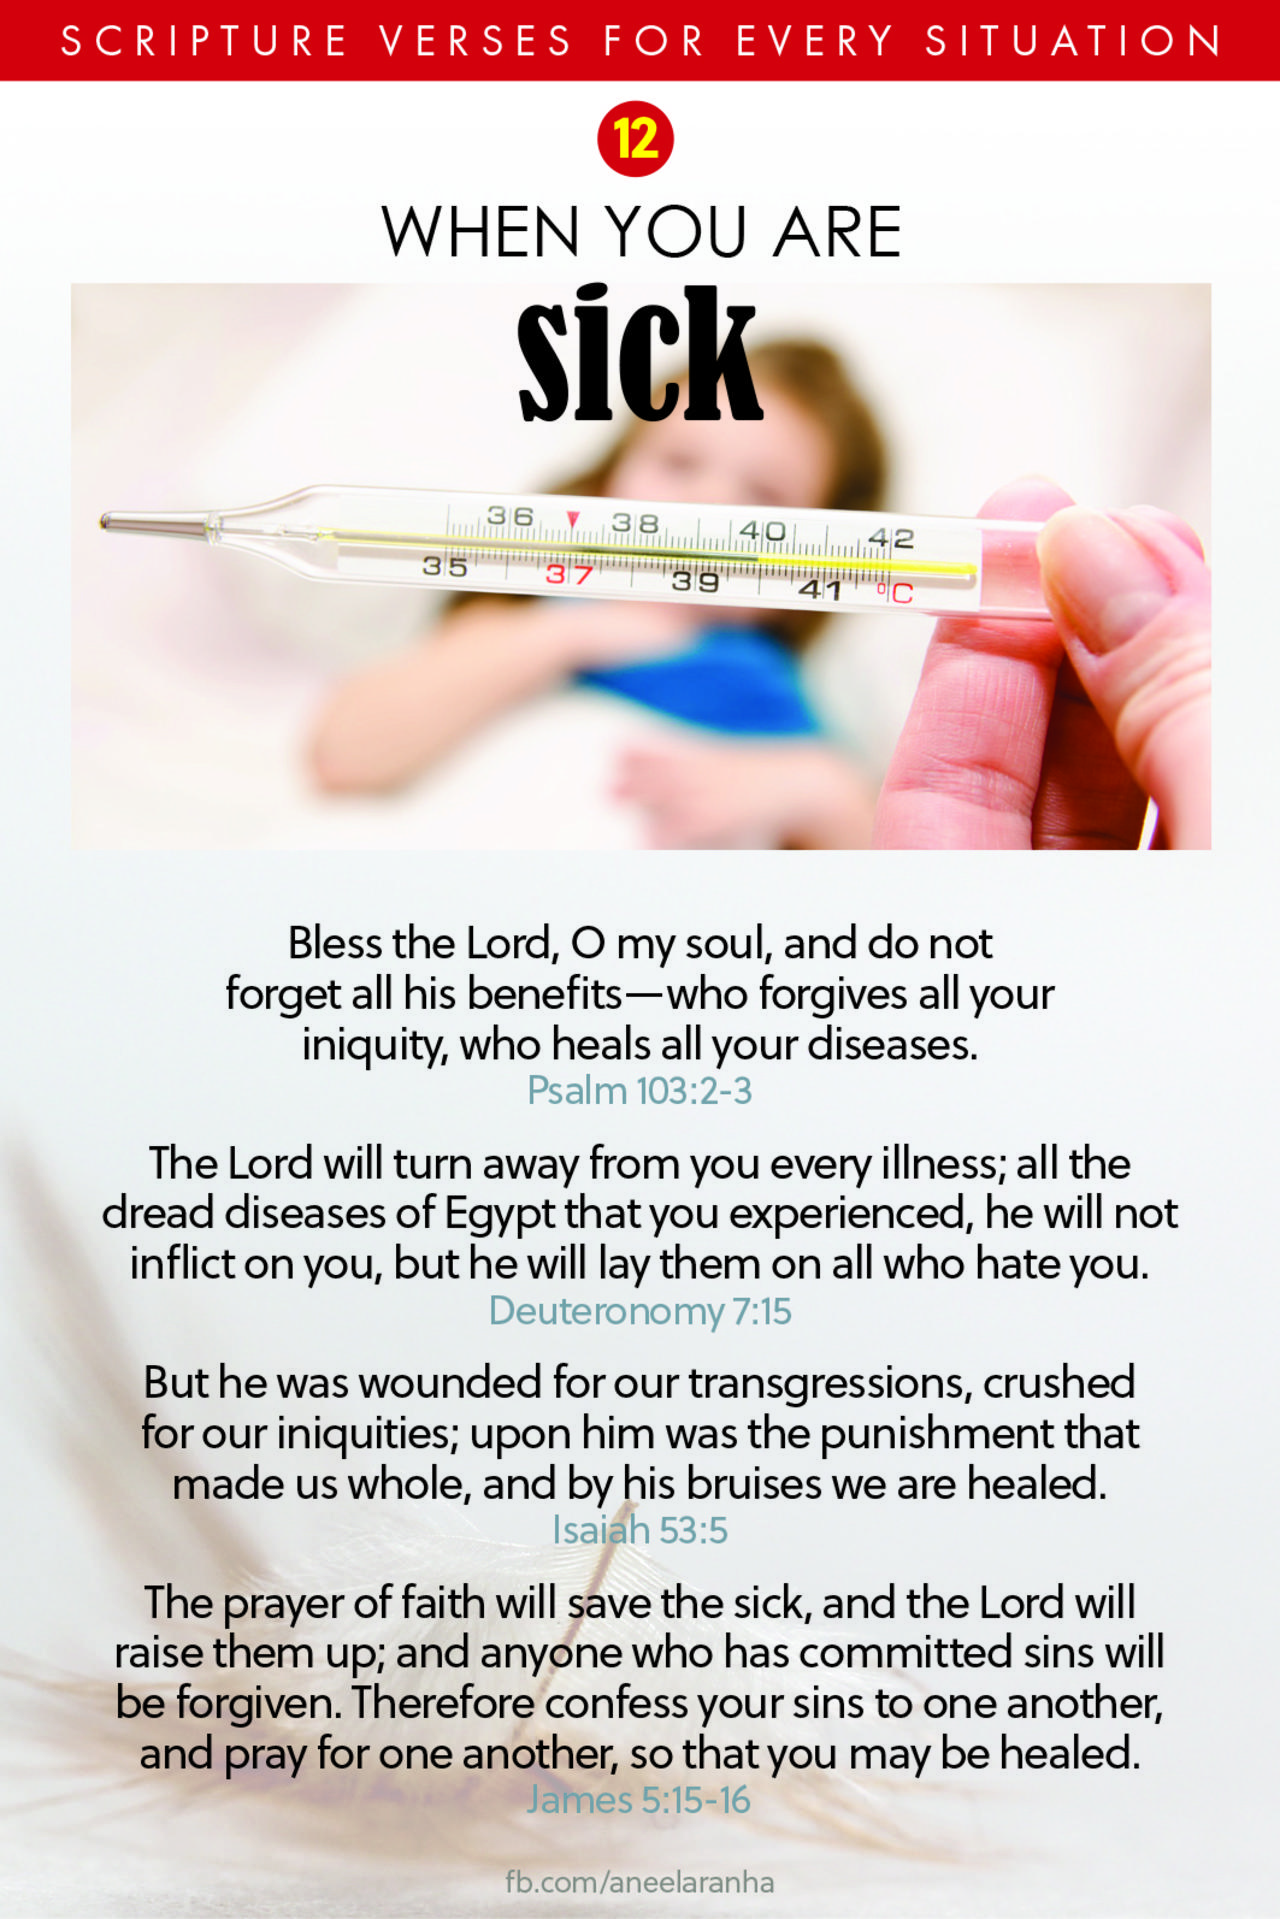 12. Are you sick?